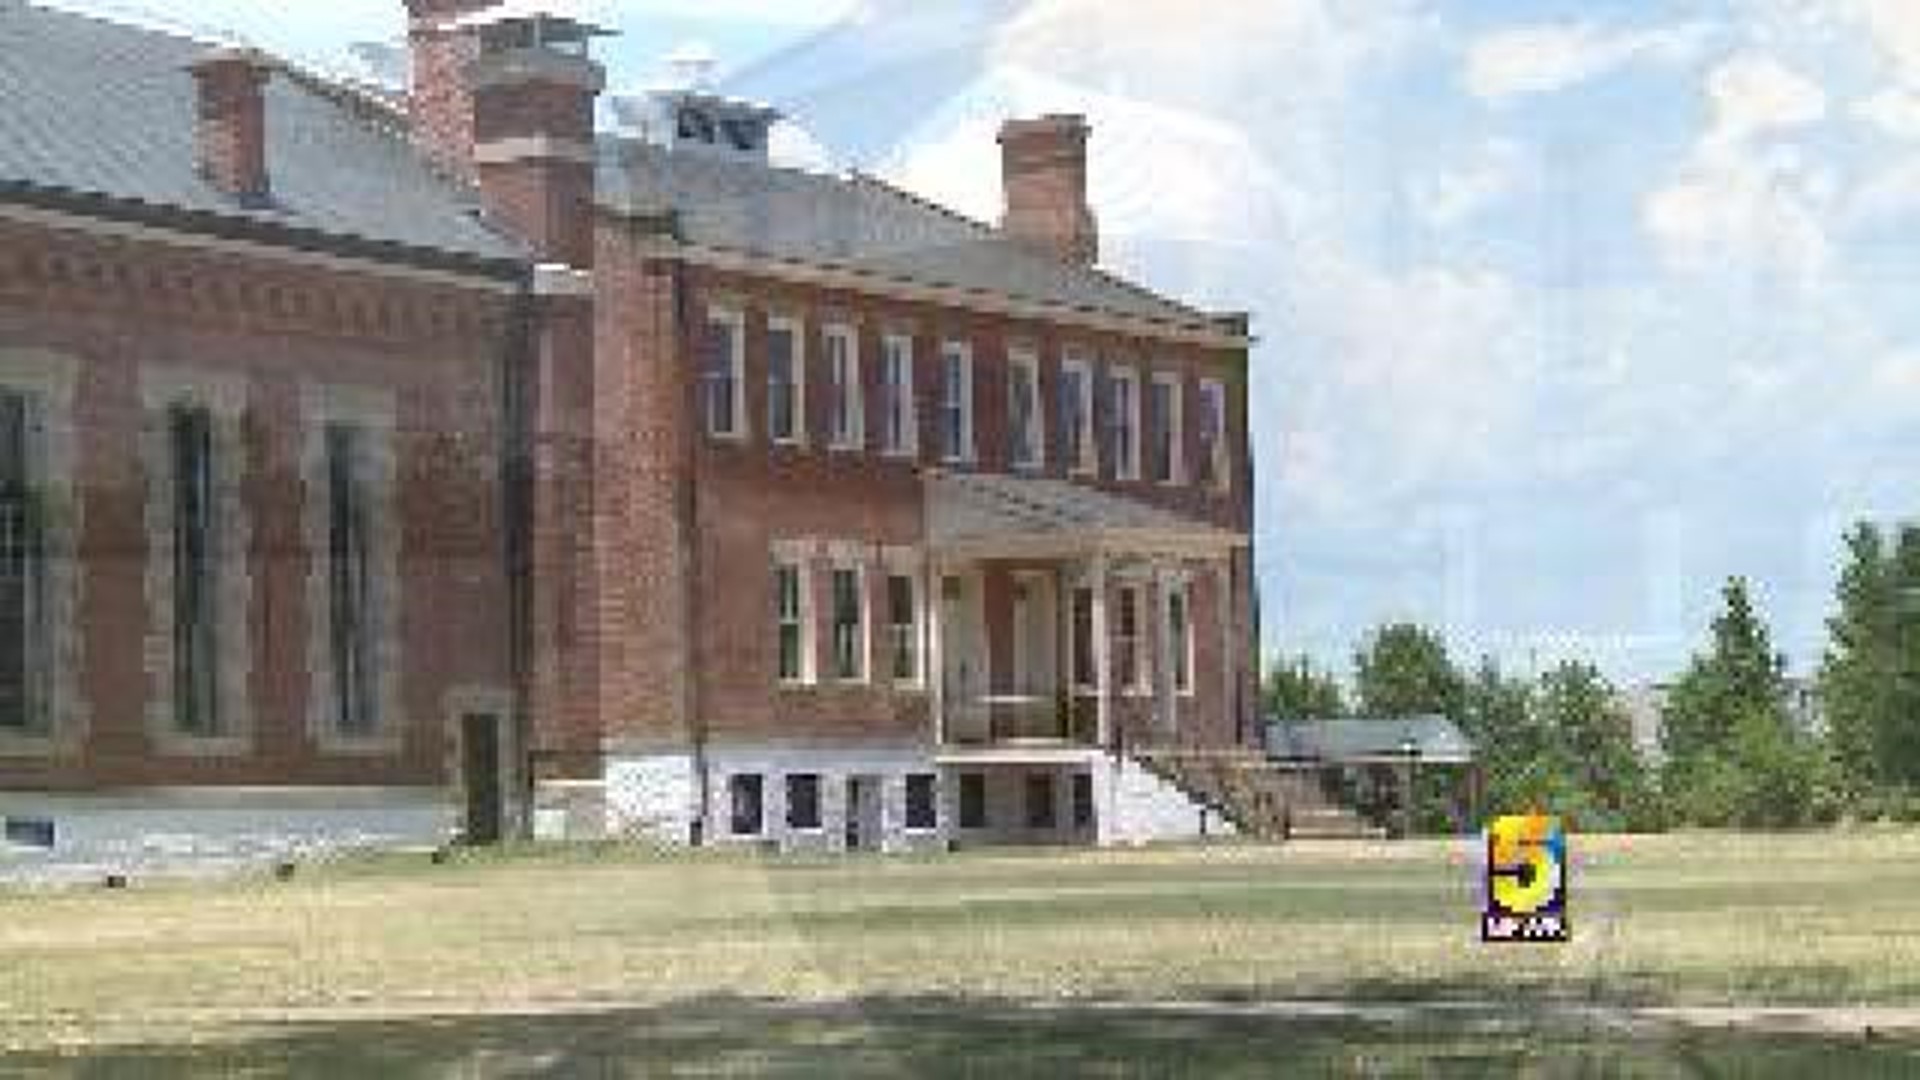 Archeologists Coming to Fort Smith